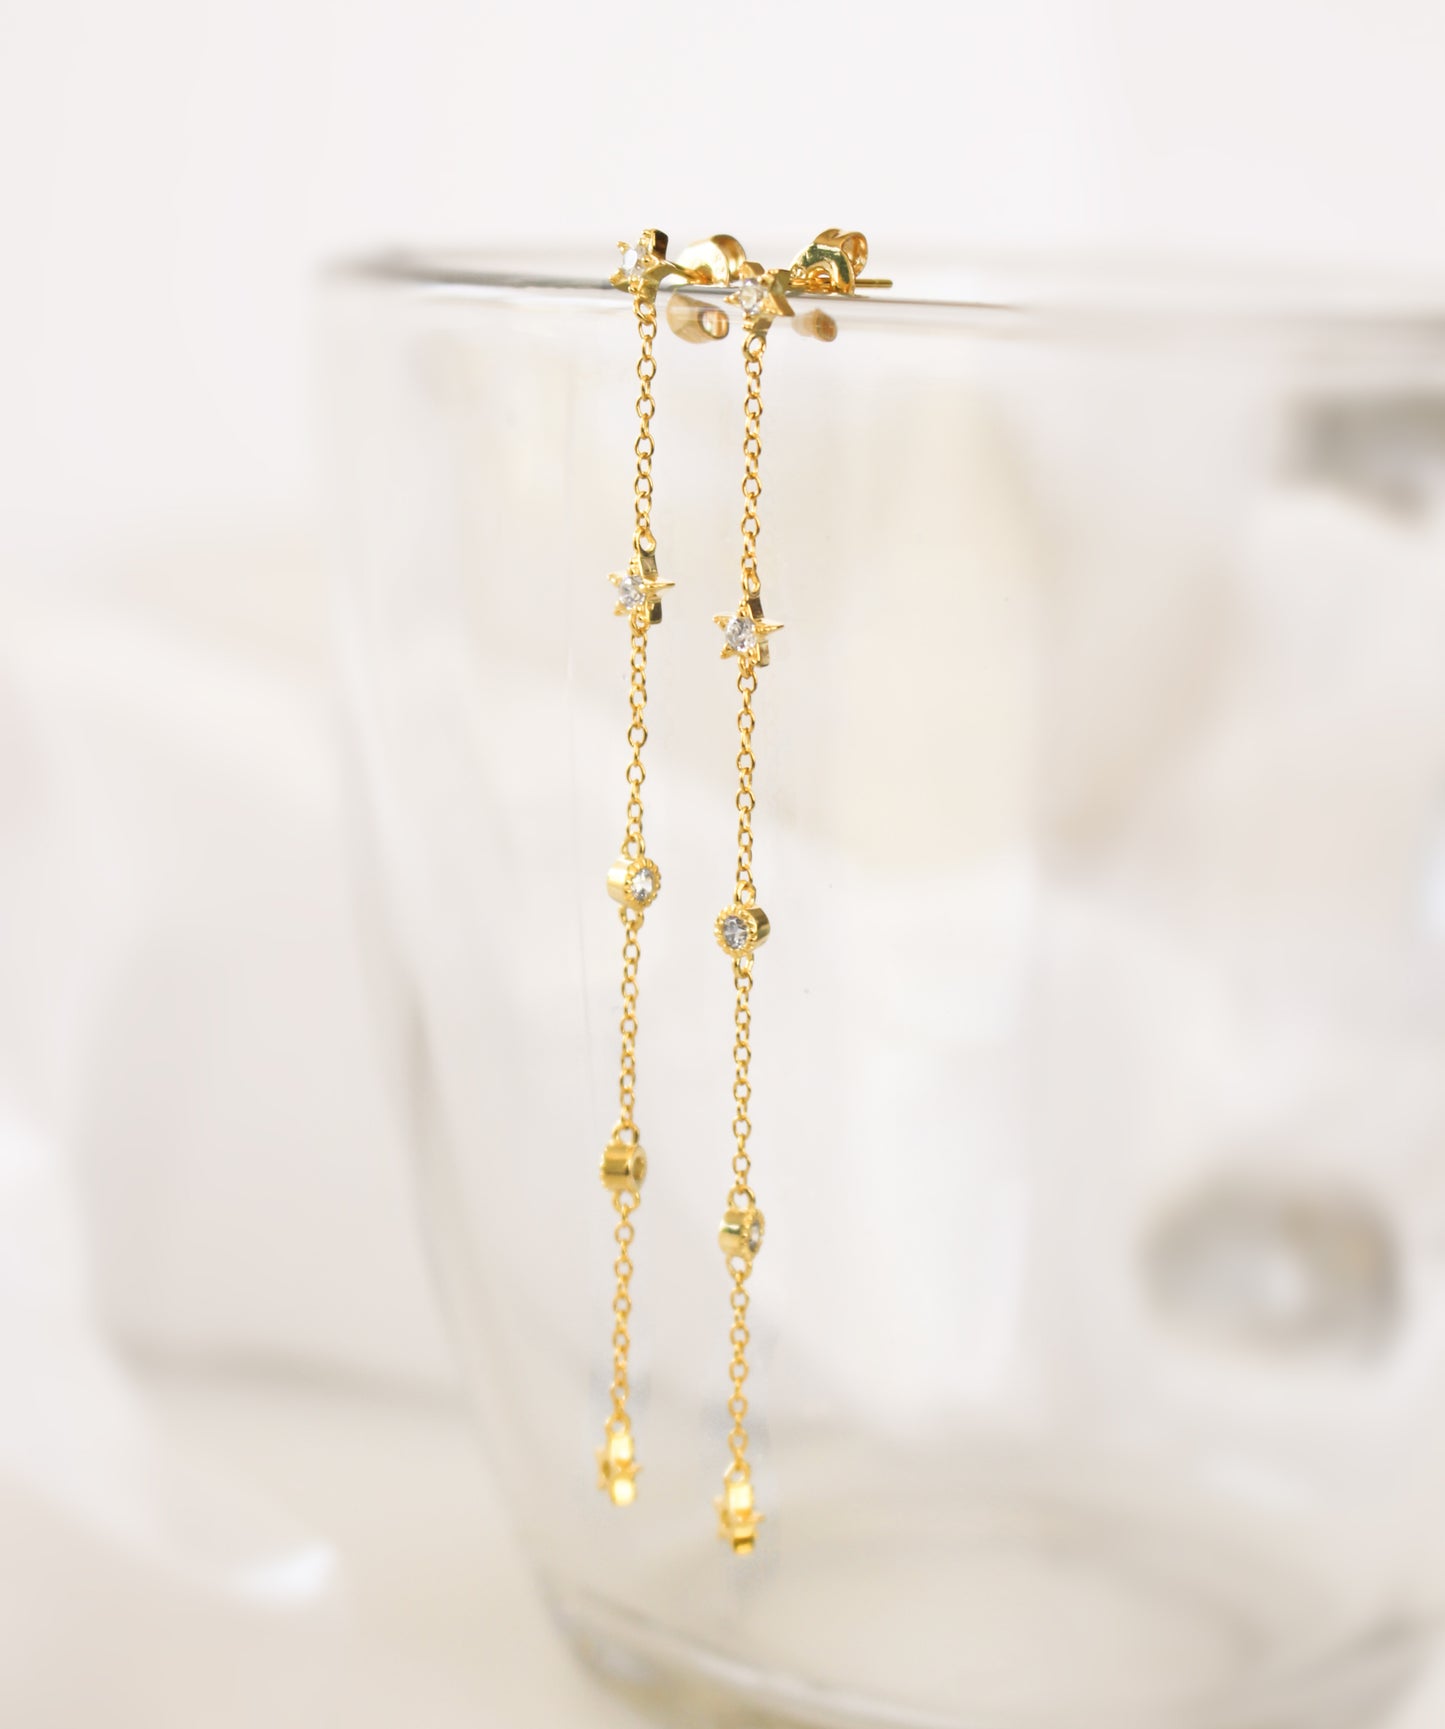 Long sparkling Earrings in 925 sterling silver gold plated